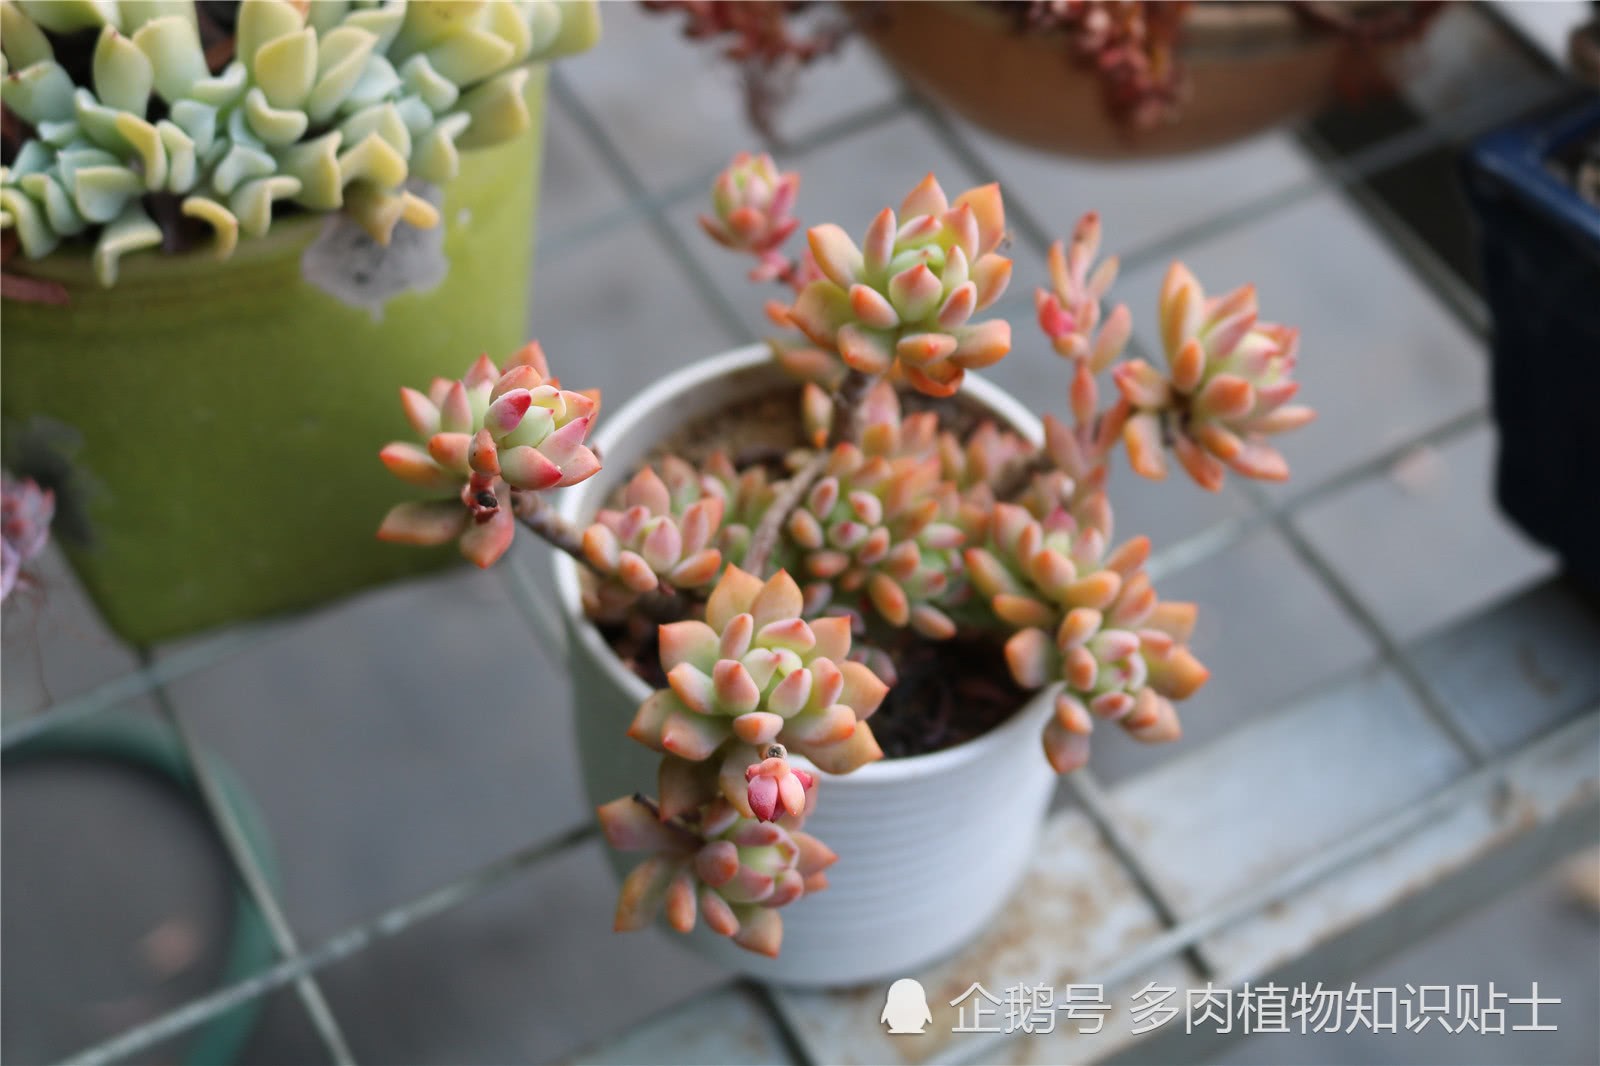 What's the perfect succulent balcony like? This spring will make you look good.